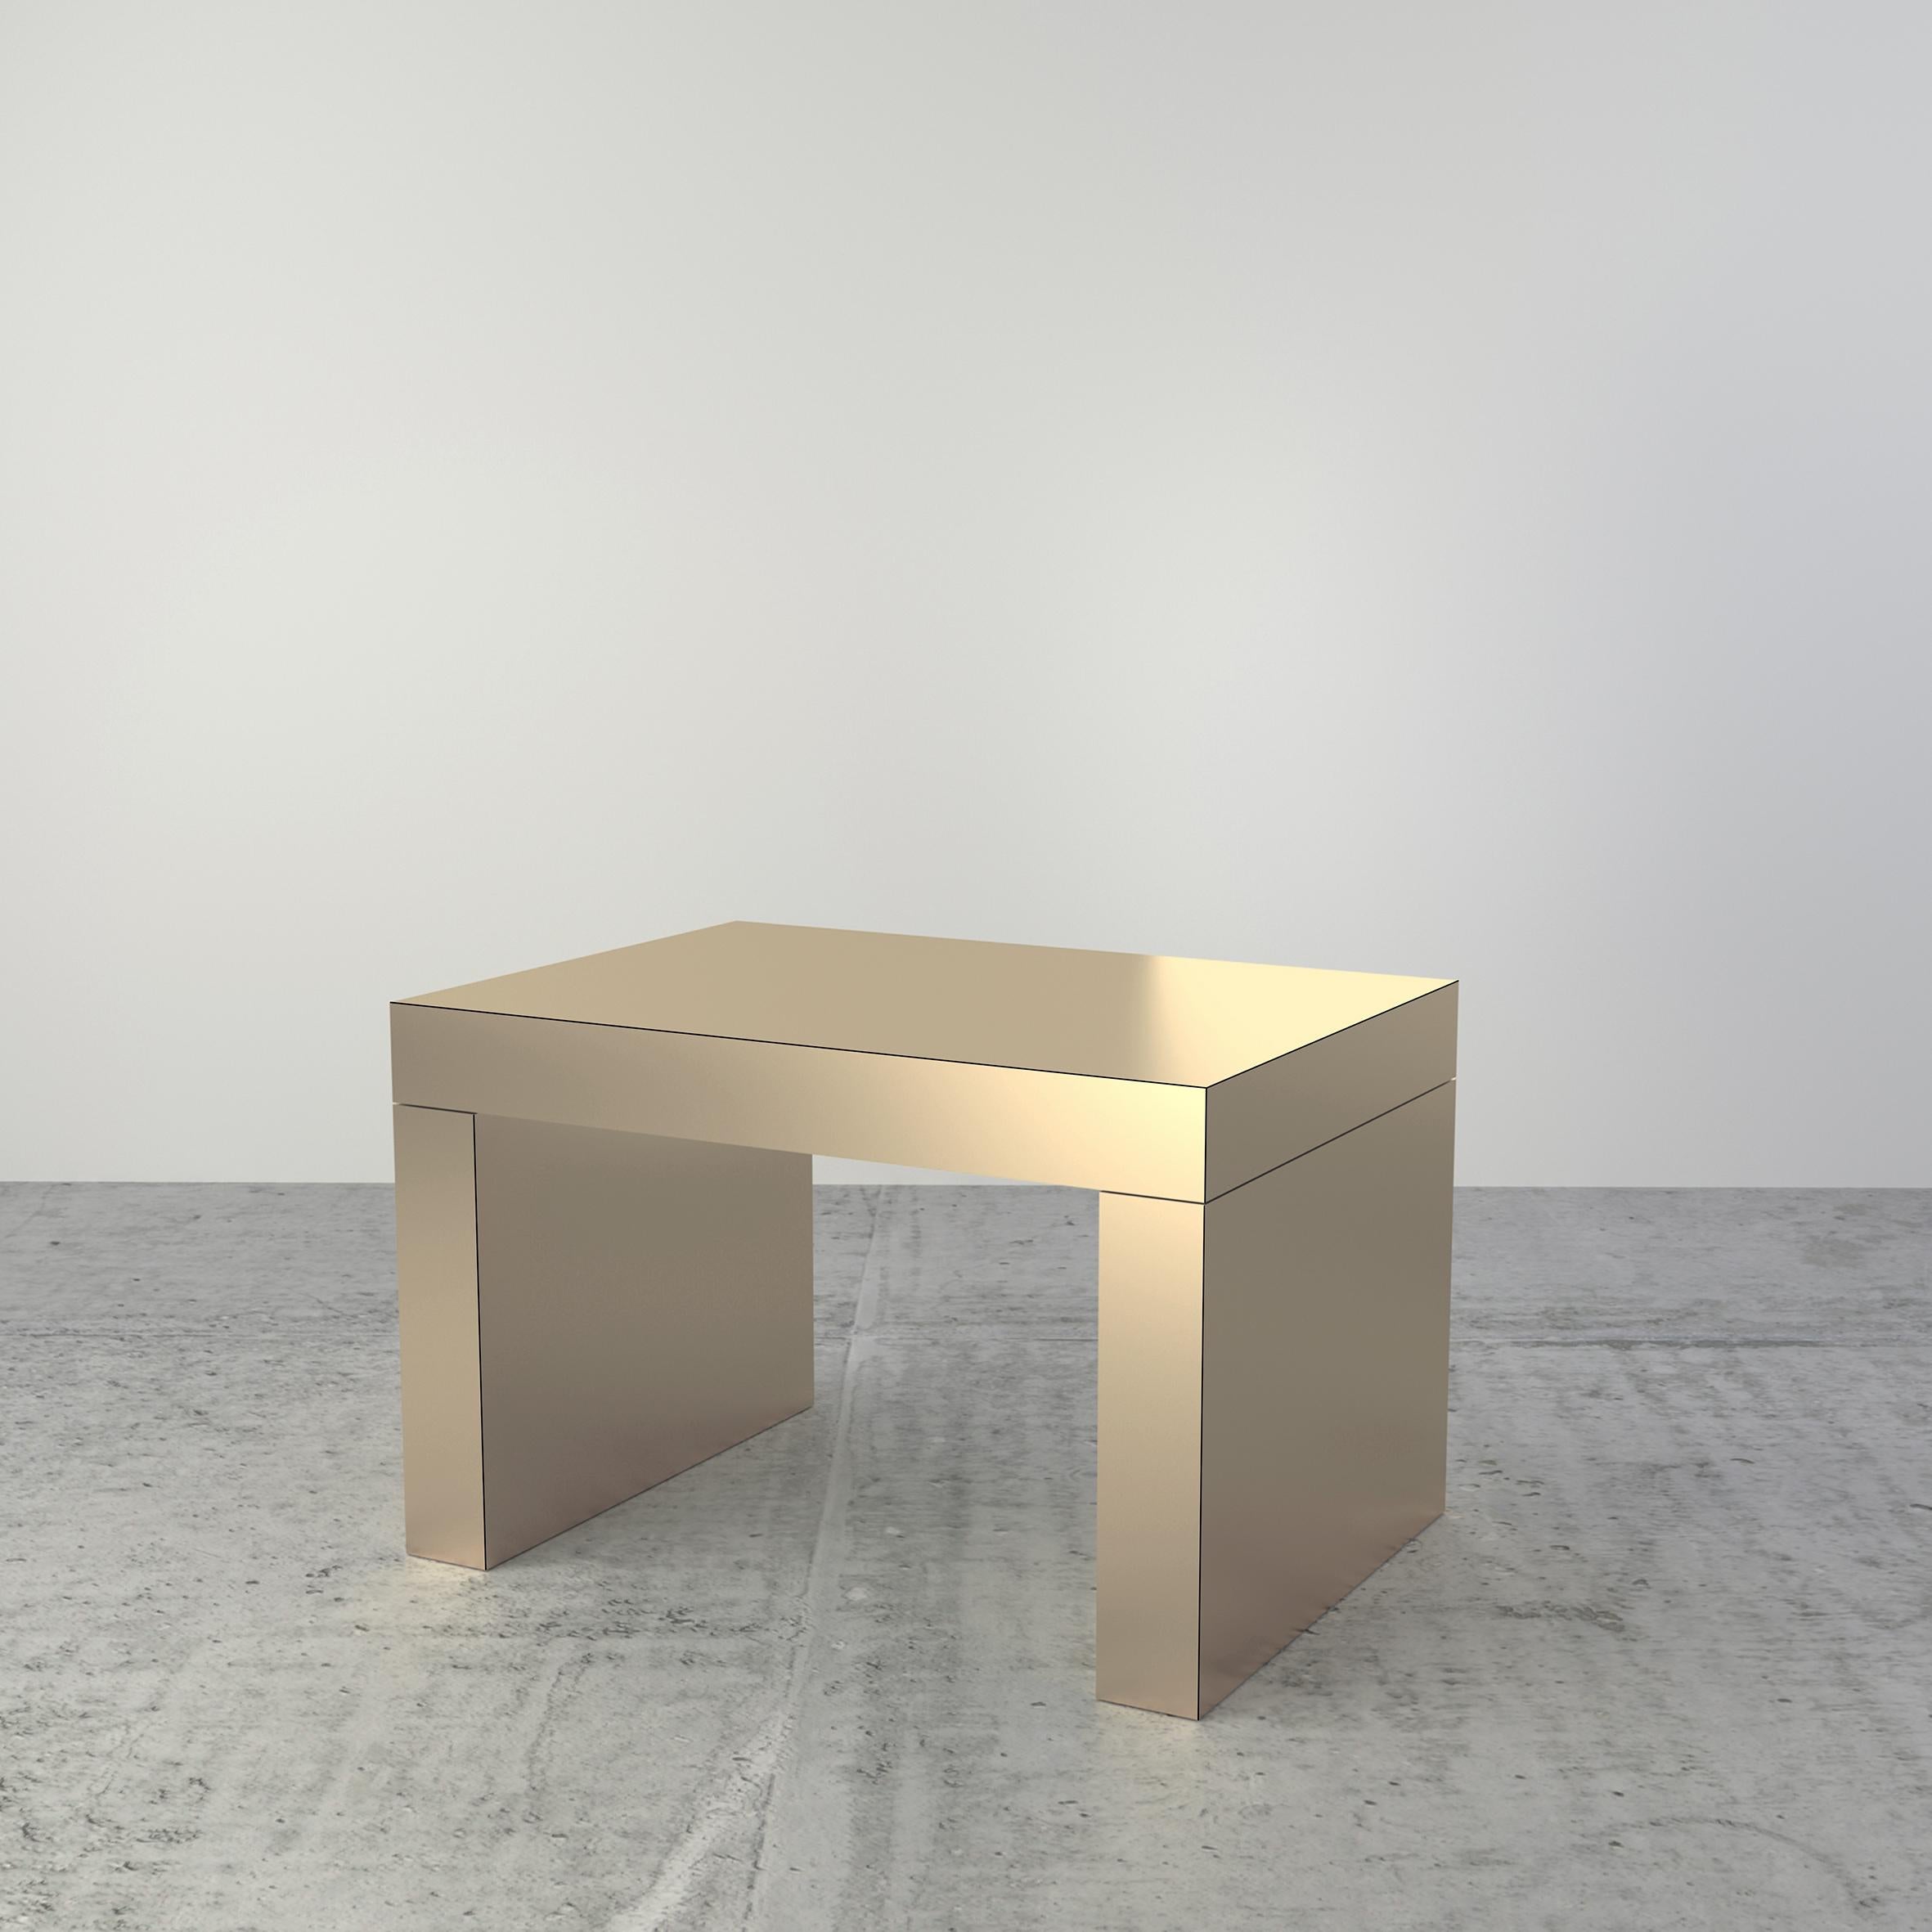 Gaby is a multifunctional coffee table entirely covered by HPL aluminum. The manufacturing process and research on metal surfaces treatment and finishing allows to highlight the shine and brightness of the metallic effect structure.

Gaby is